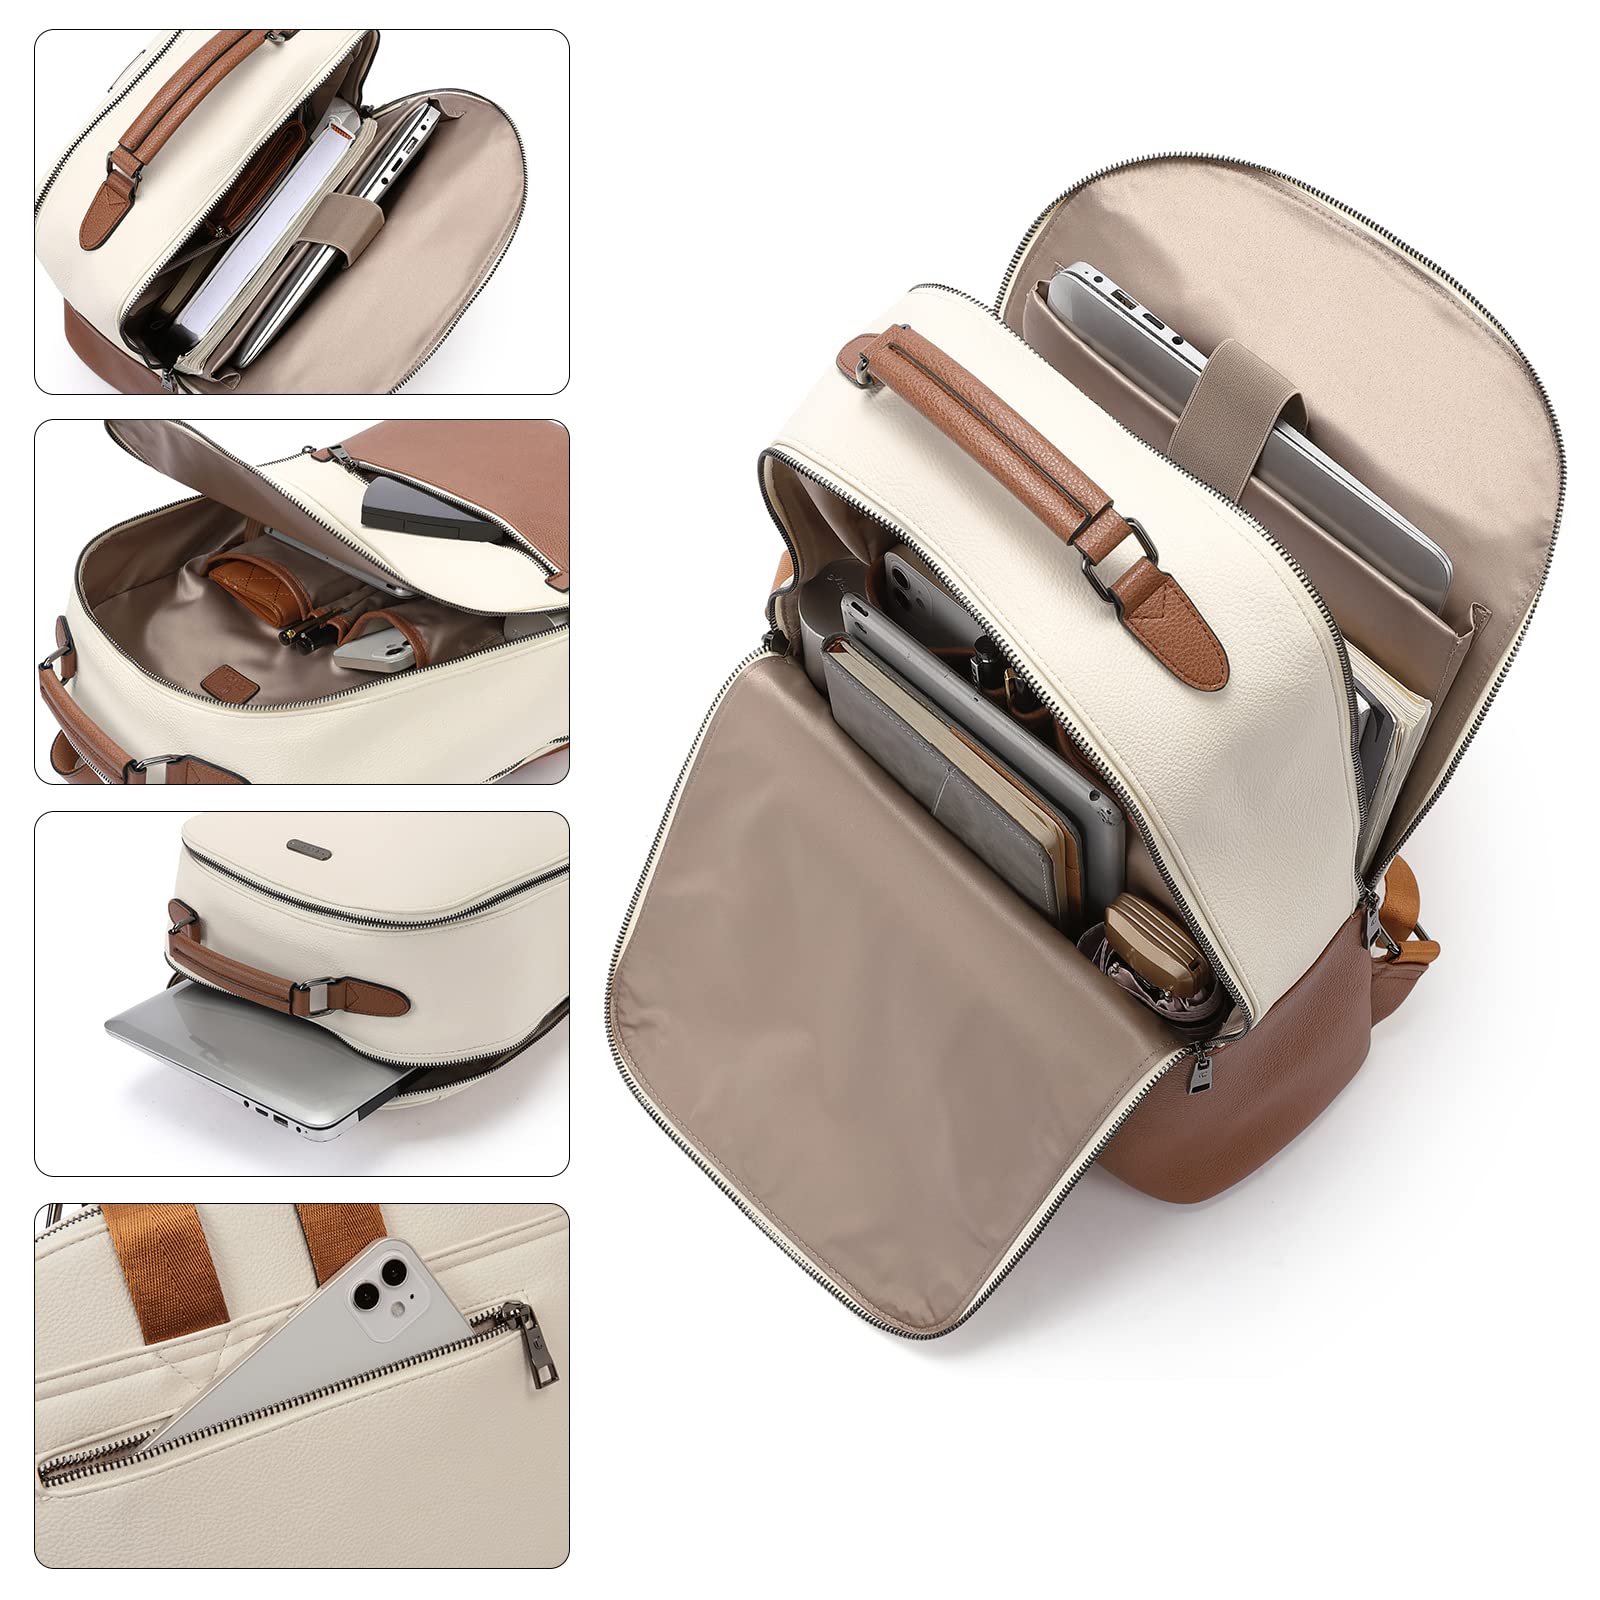 CLUCI Women Leather Laptop Backpack Purse 15.6 inch Computer Backpack Business Casual Travel Daypack Bag Off-white with brown